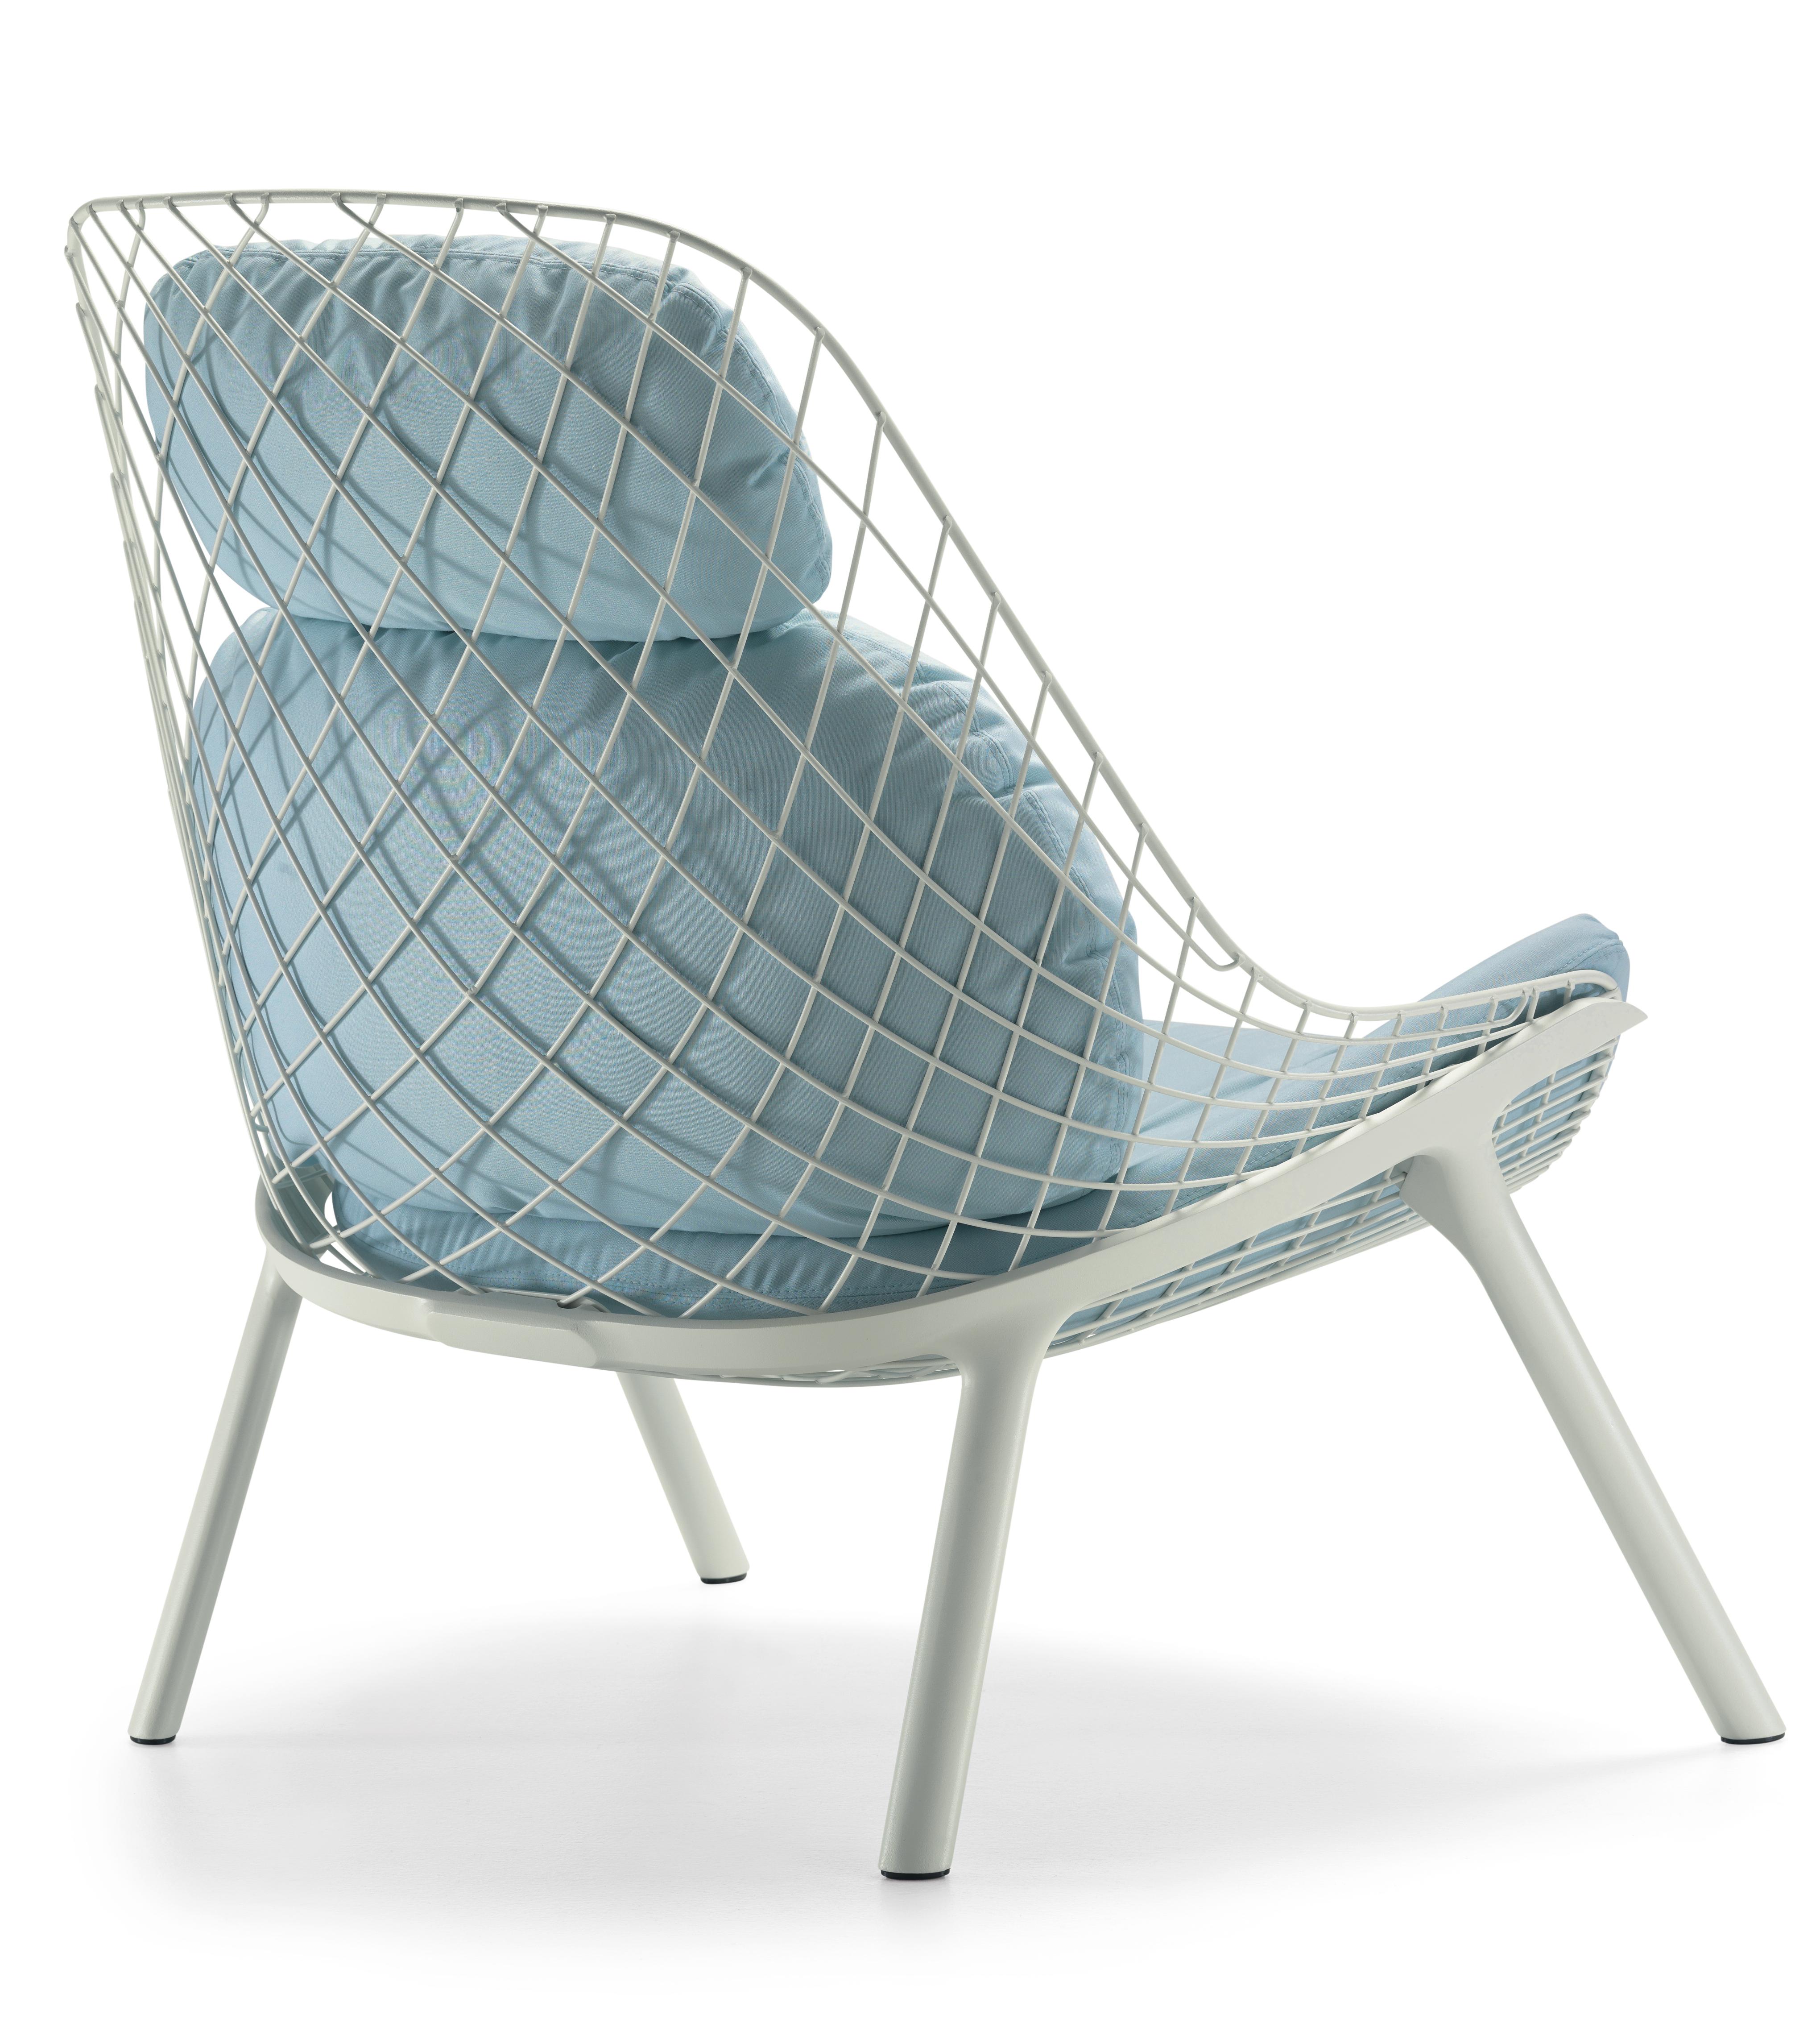 Alias 035 Gran Kobi Outdoor Armchair with Pad and White Lacquered Aluminum Frame by Patrick Norguet

Armchair with shell in lacquered steel; support belt and legs in lacquered aluminium. Cushion in expanded polyuretane upholstered in fabric or